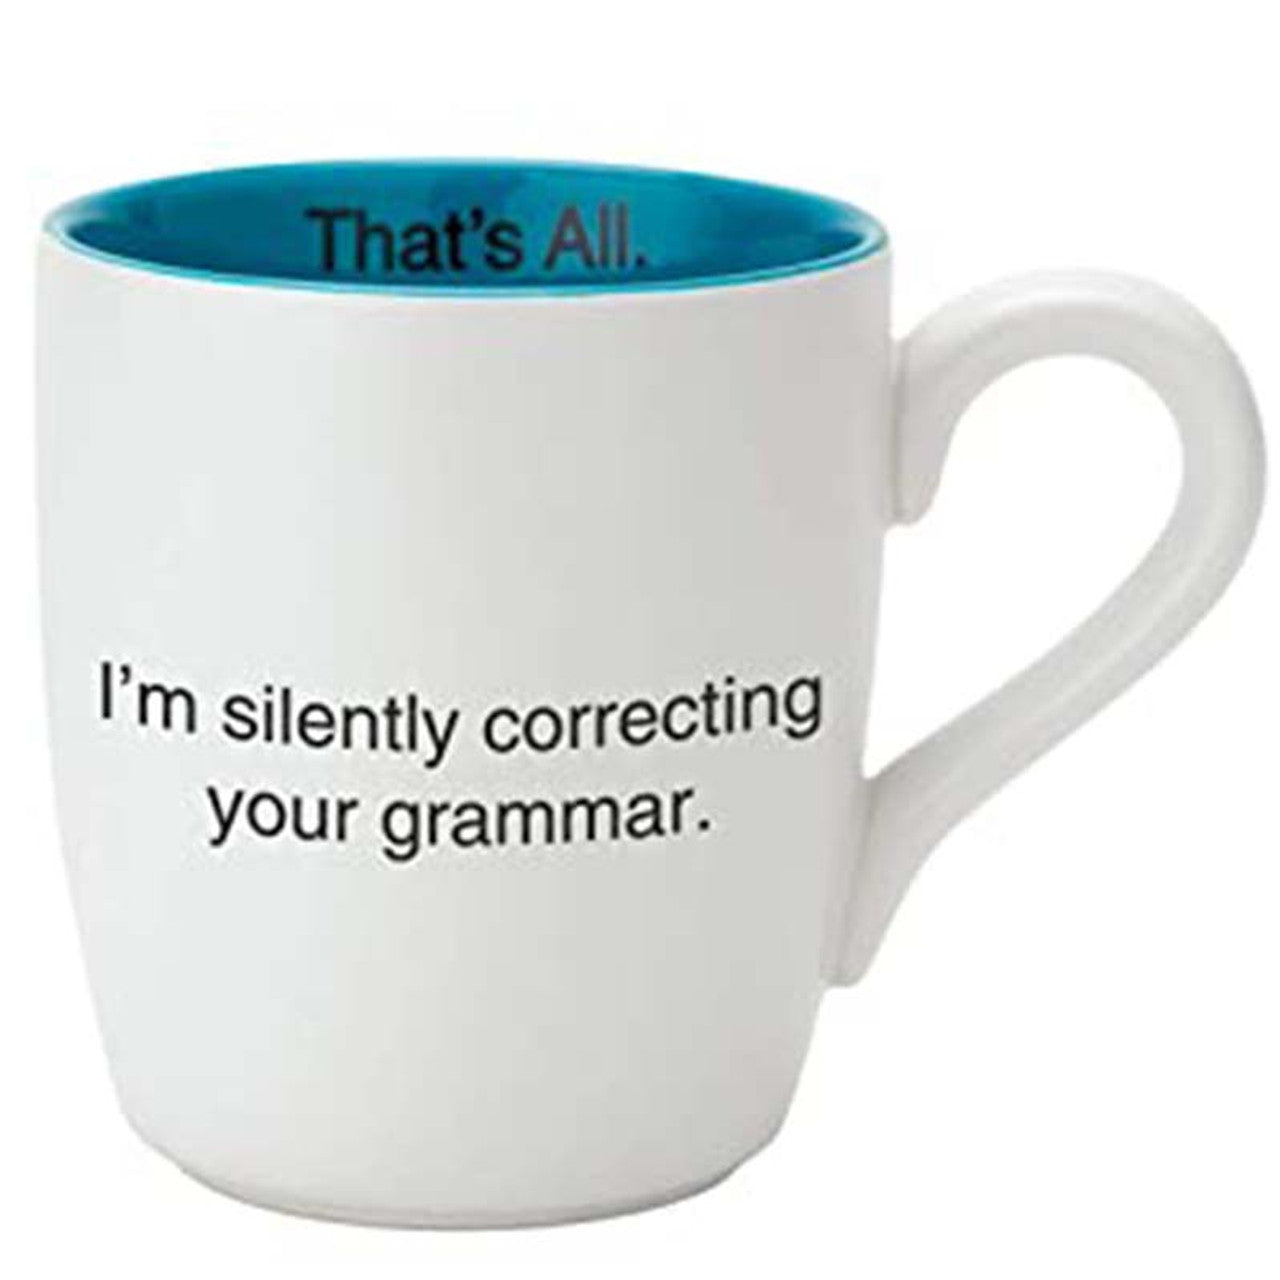 I'm Silently Correcting Your Grammar Ceramic Coffee Tea Mug in Teal and White | 16oz